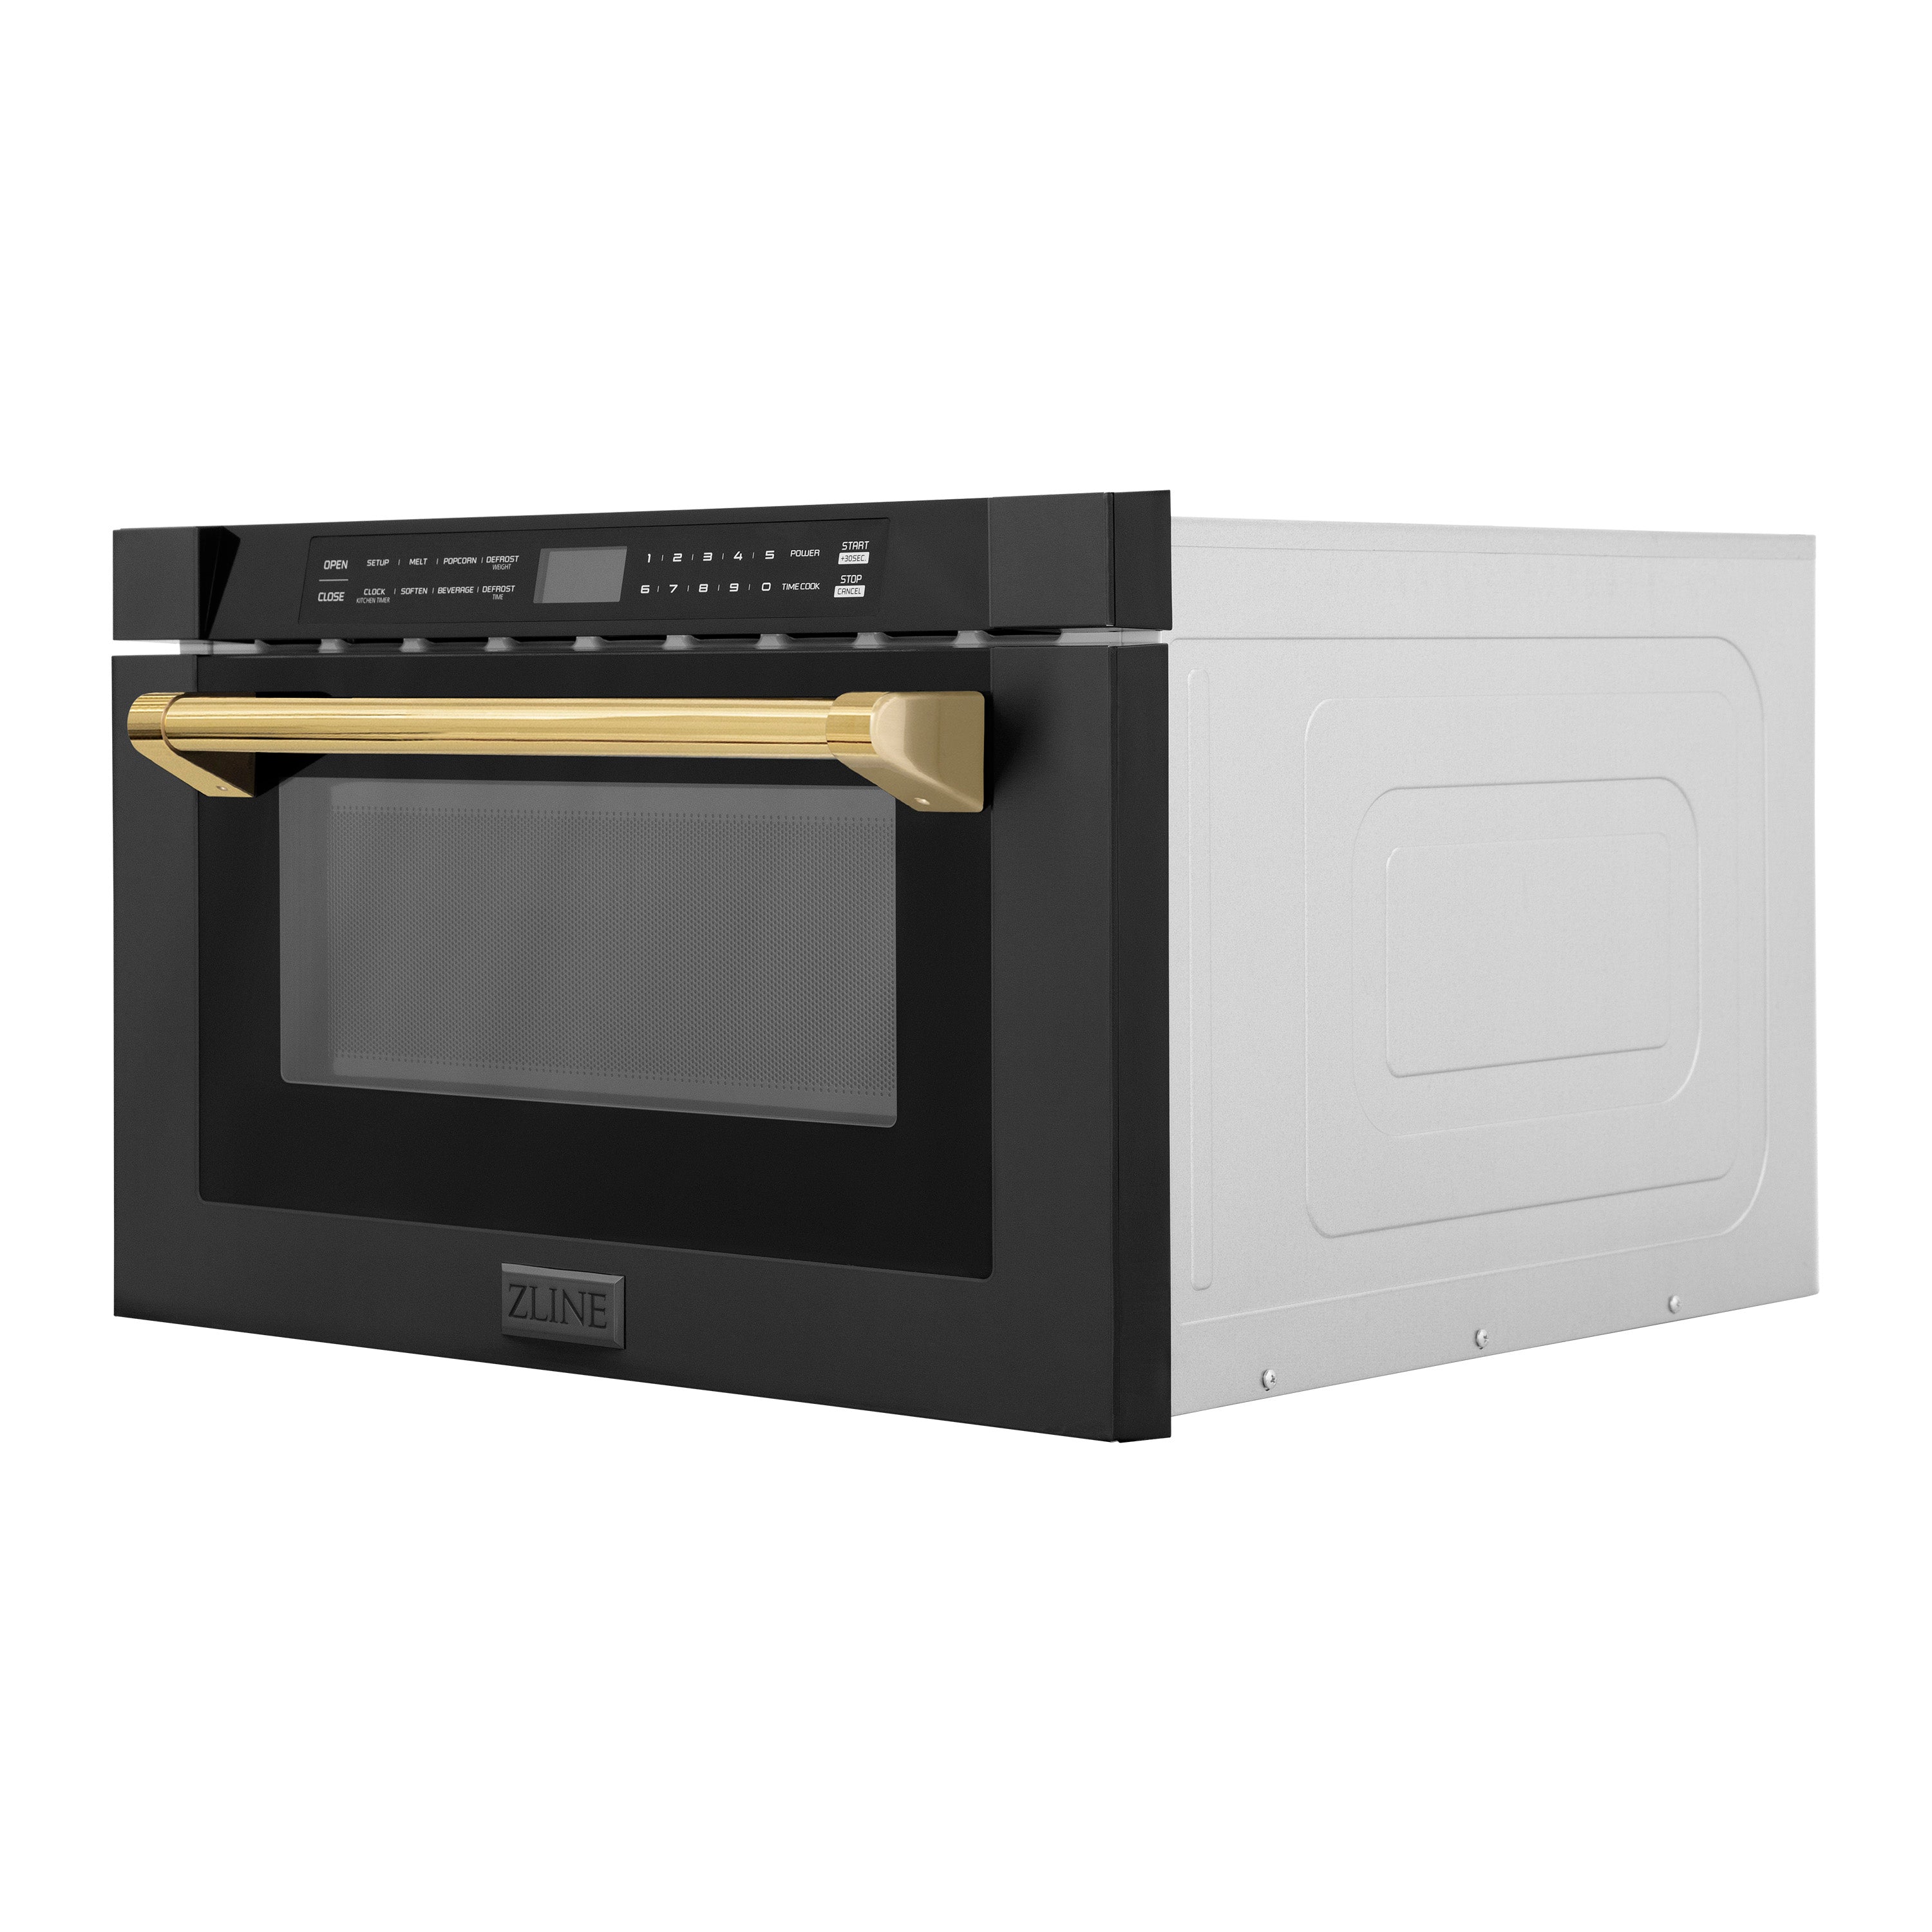 ZLINE Autograph Edition 24 in. 1.2 cu. ft. Built-in Microwave Drawer in Black Stainless Steel with Gold Accents (MWDZ-1-BS-H-G) Side View Drawer Closed